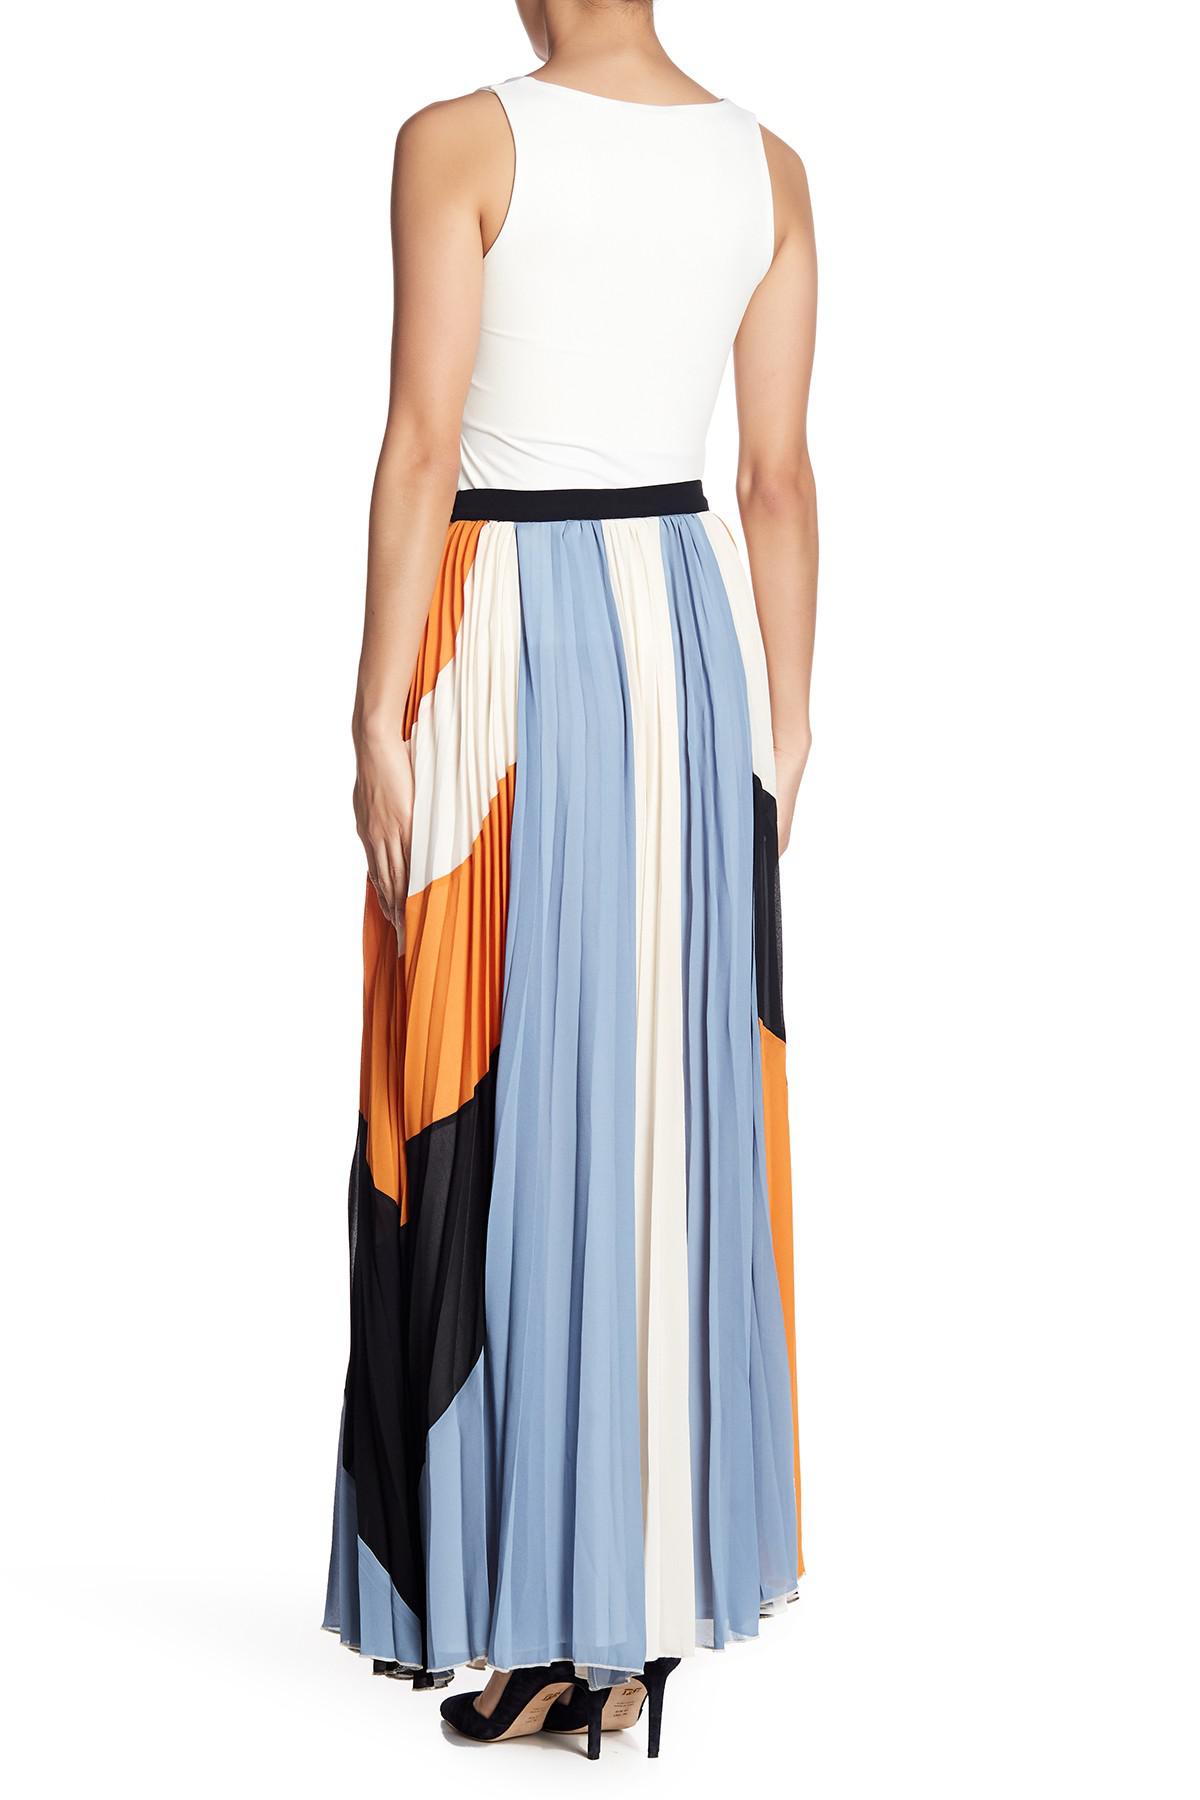 Gracia Synthetic Pleated Colorblock Maxi Skirt in Blue-Ivory (Blue) - Lyst